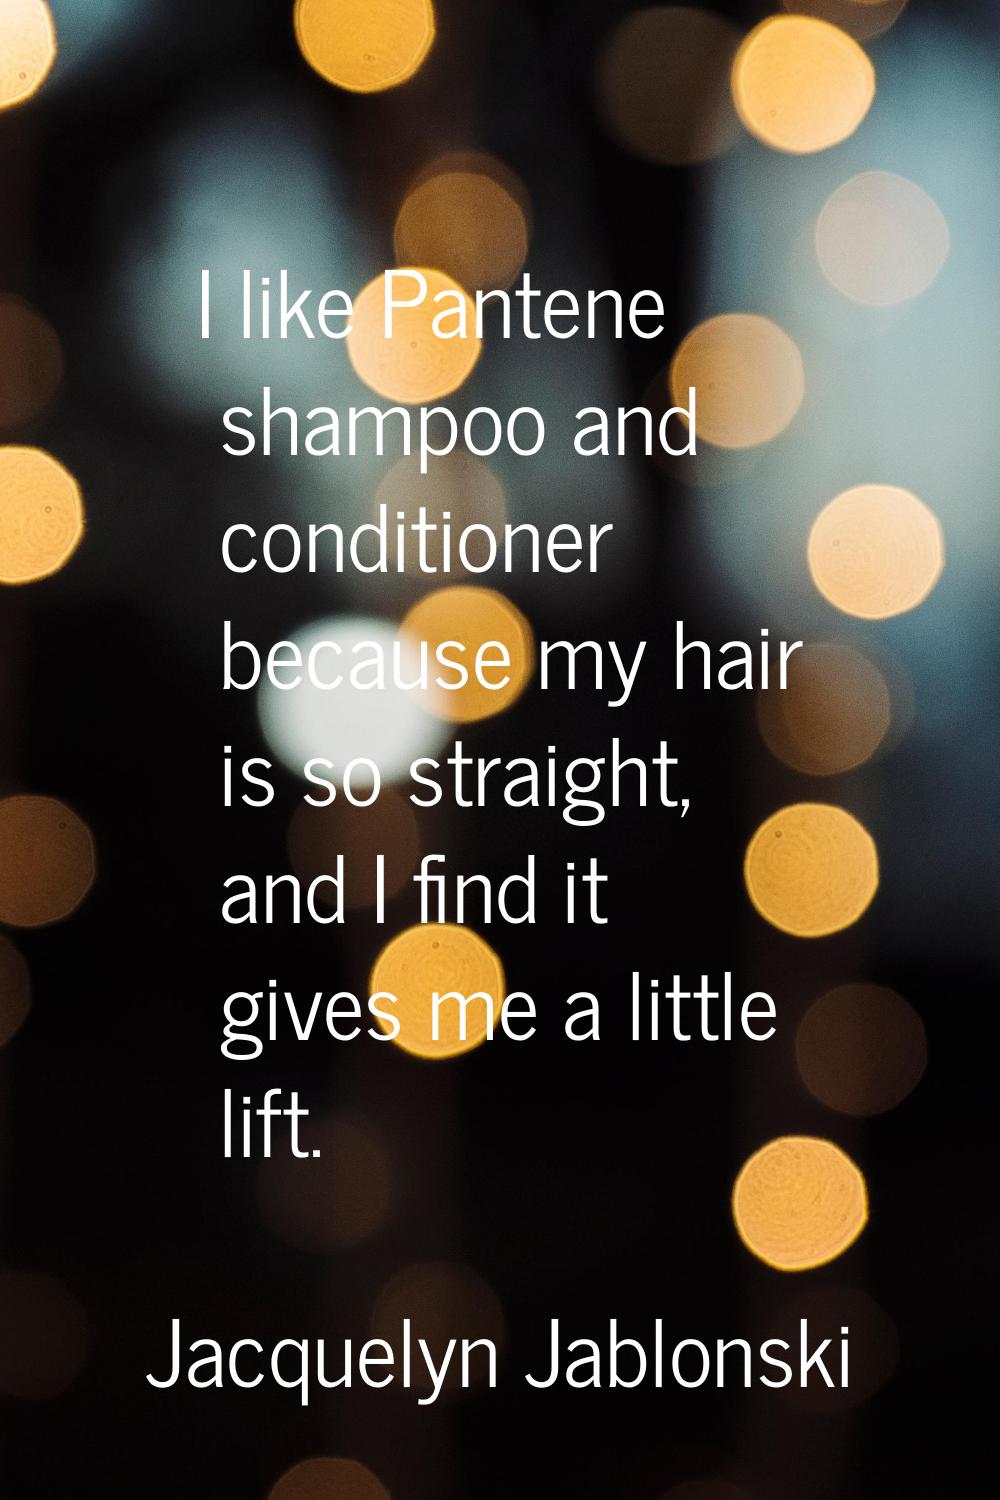 I like Pantene shampoo and conditioner because my hair is so straight, and I find it gives me a lit